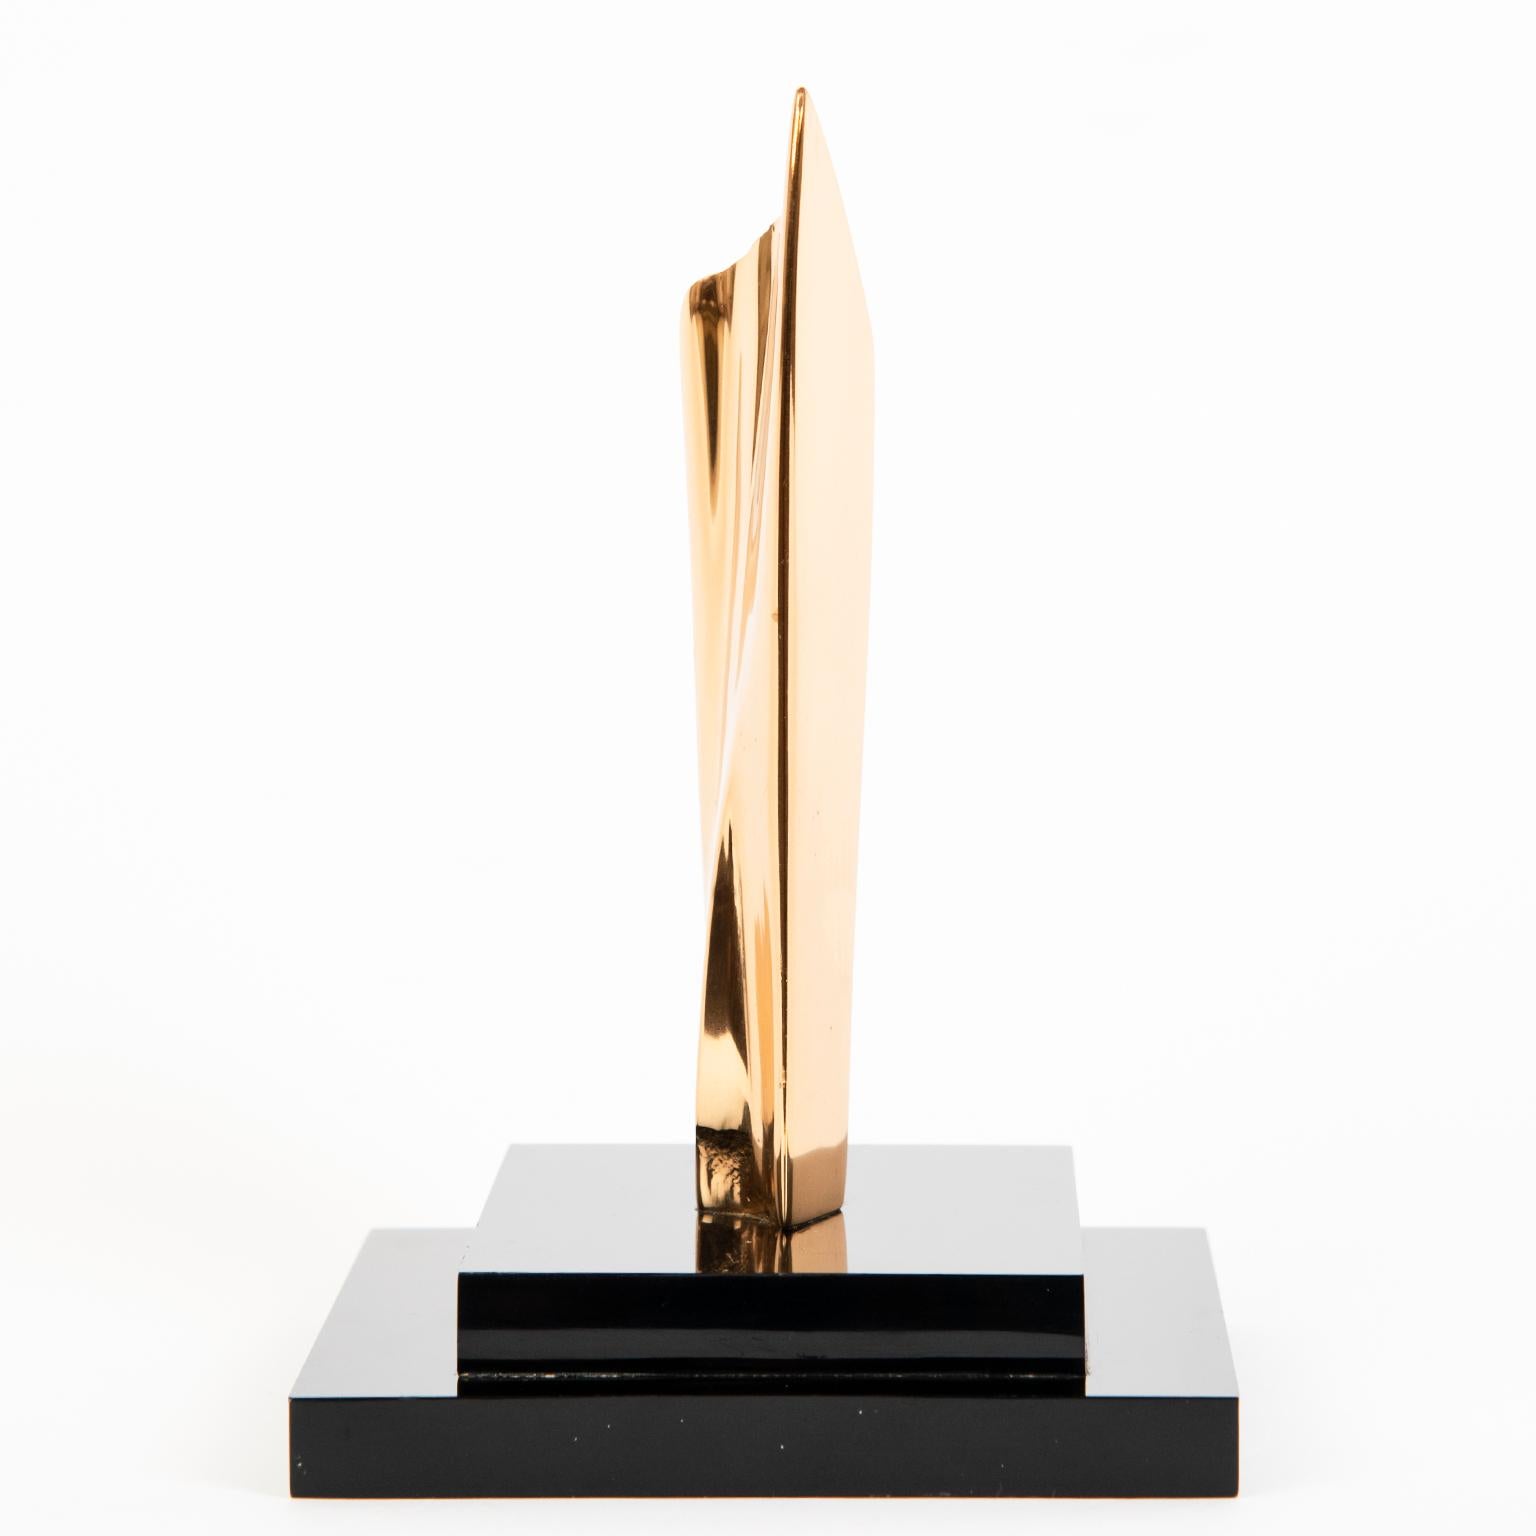 A diminutive polished abstract gilt bronze on black acrylic stand by Canadian May Marx, etched signature at the base and labeled with sticker under 